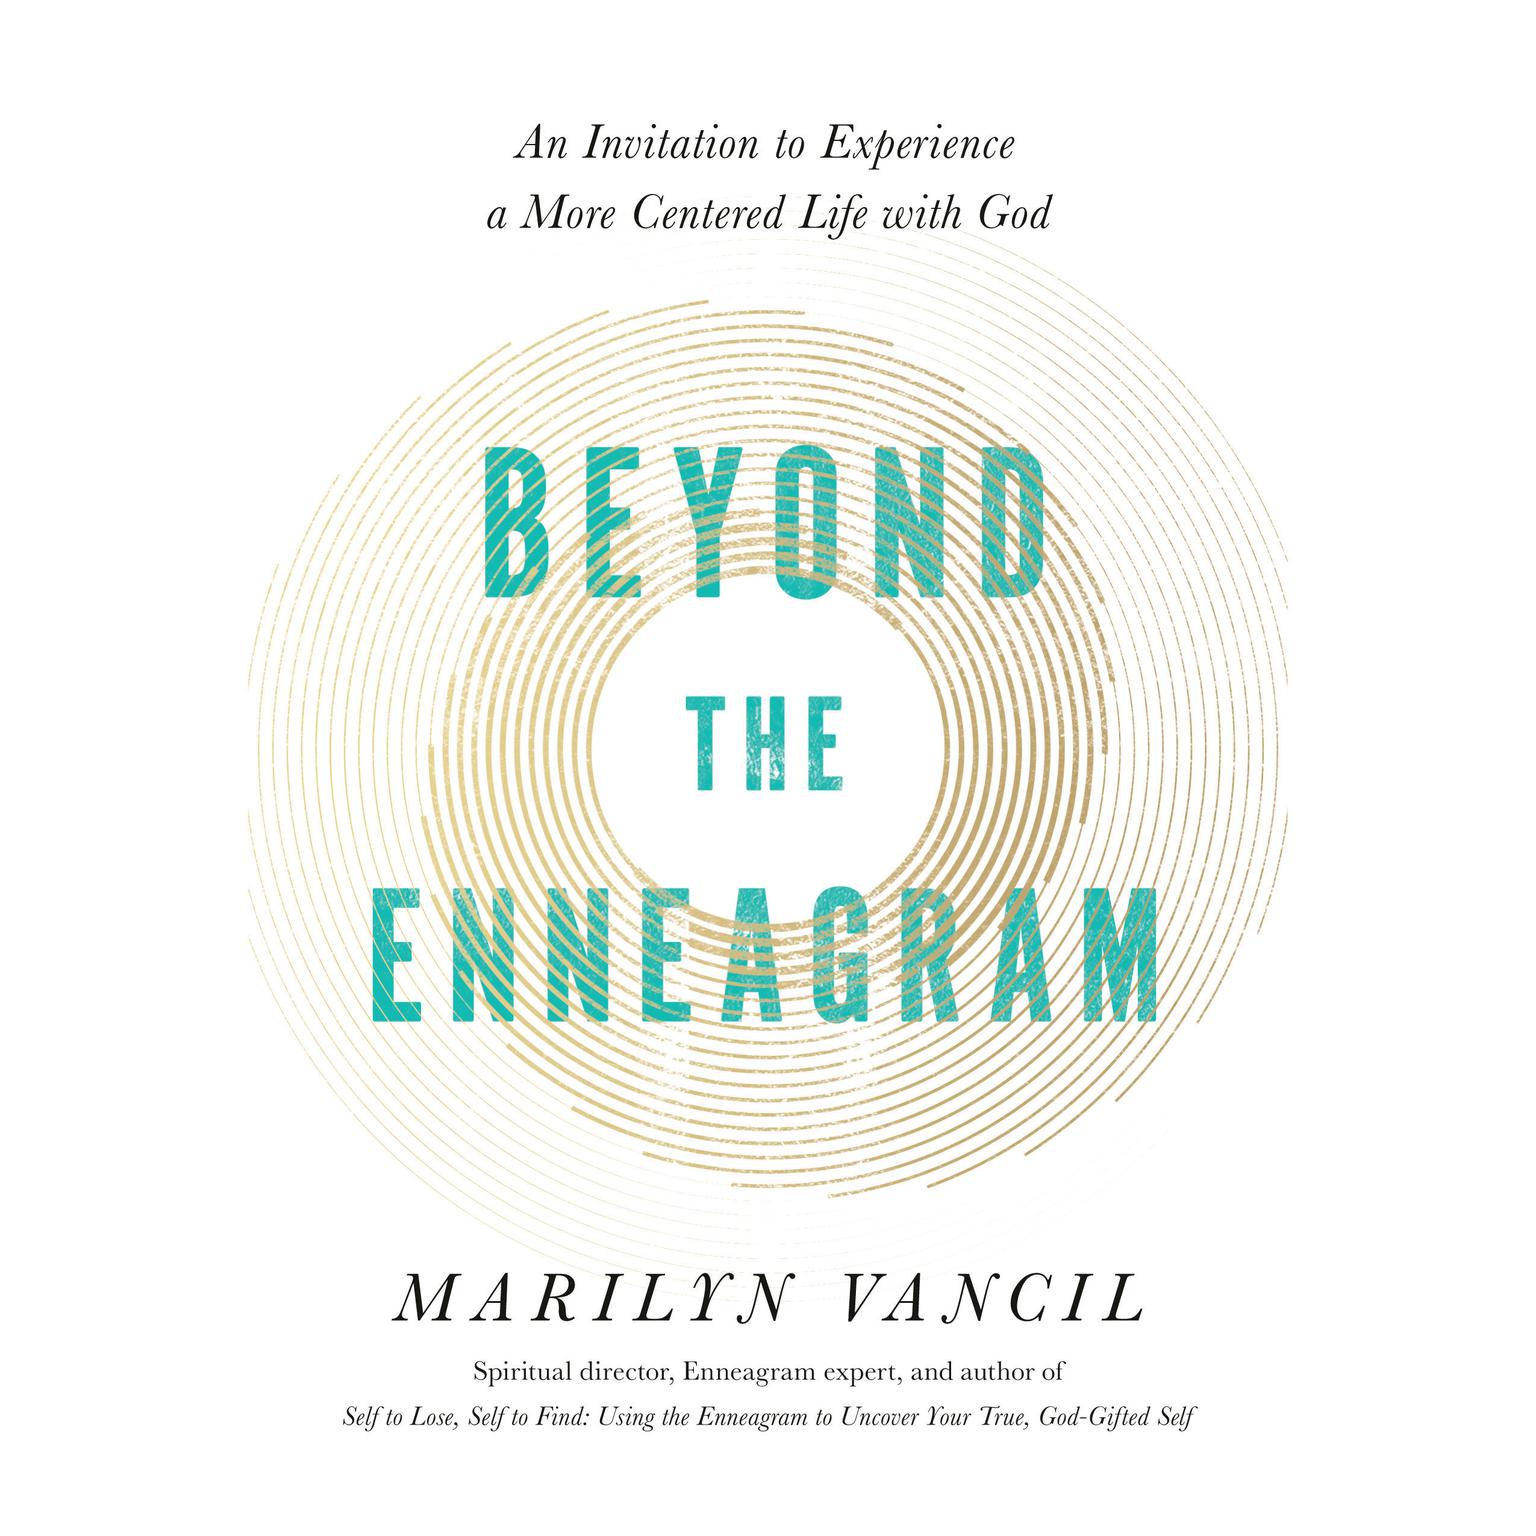 Beyond the Enneagram: An Invitation to Experience a More Centered Life with God Audiobook, by Marilyn Vancil